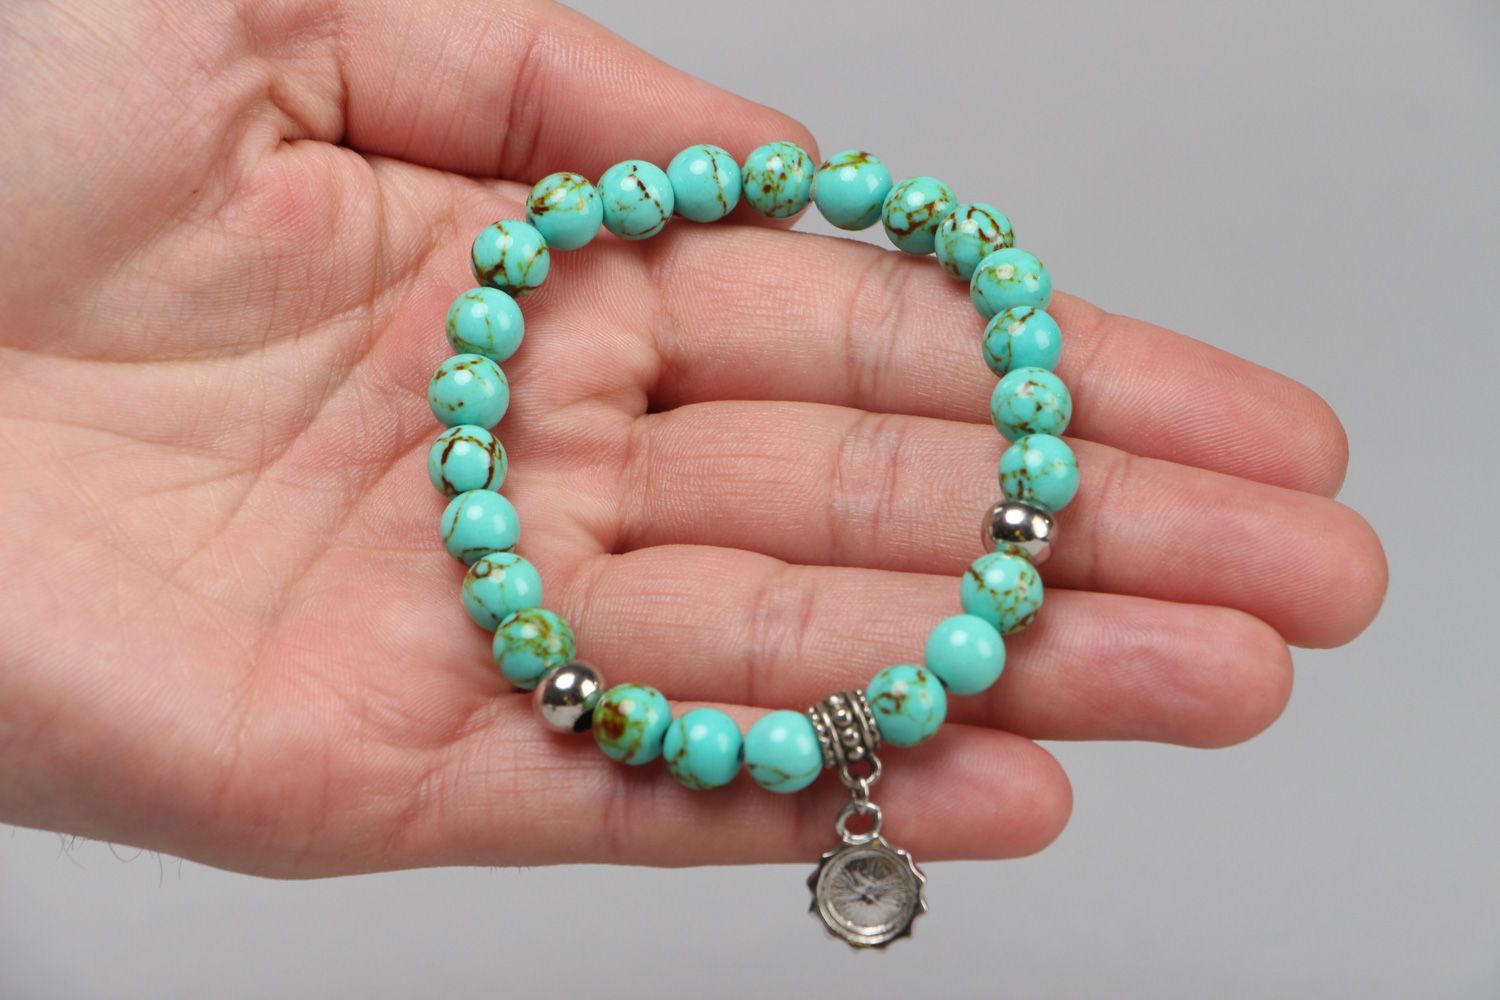 Handmade stretch wrist bracelet with natural turquoise beads and metal charm photo 3